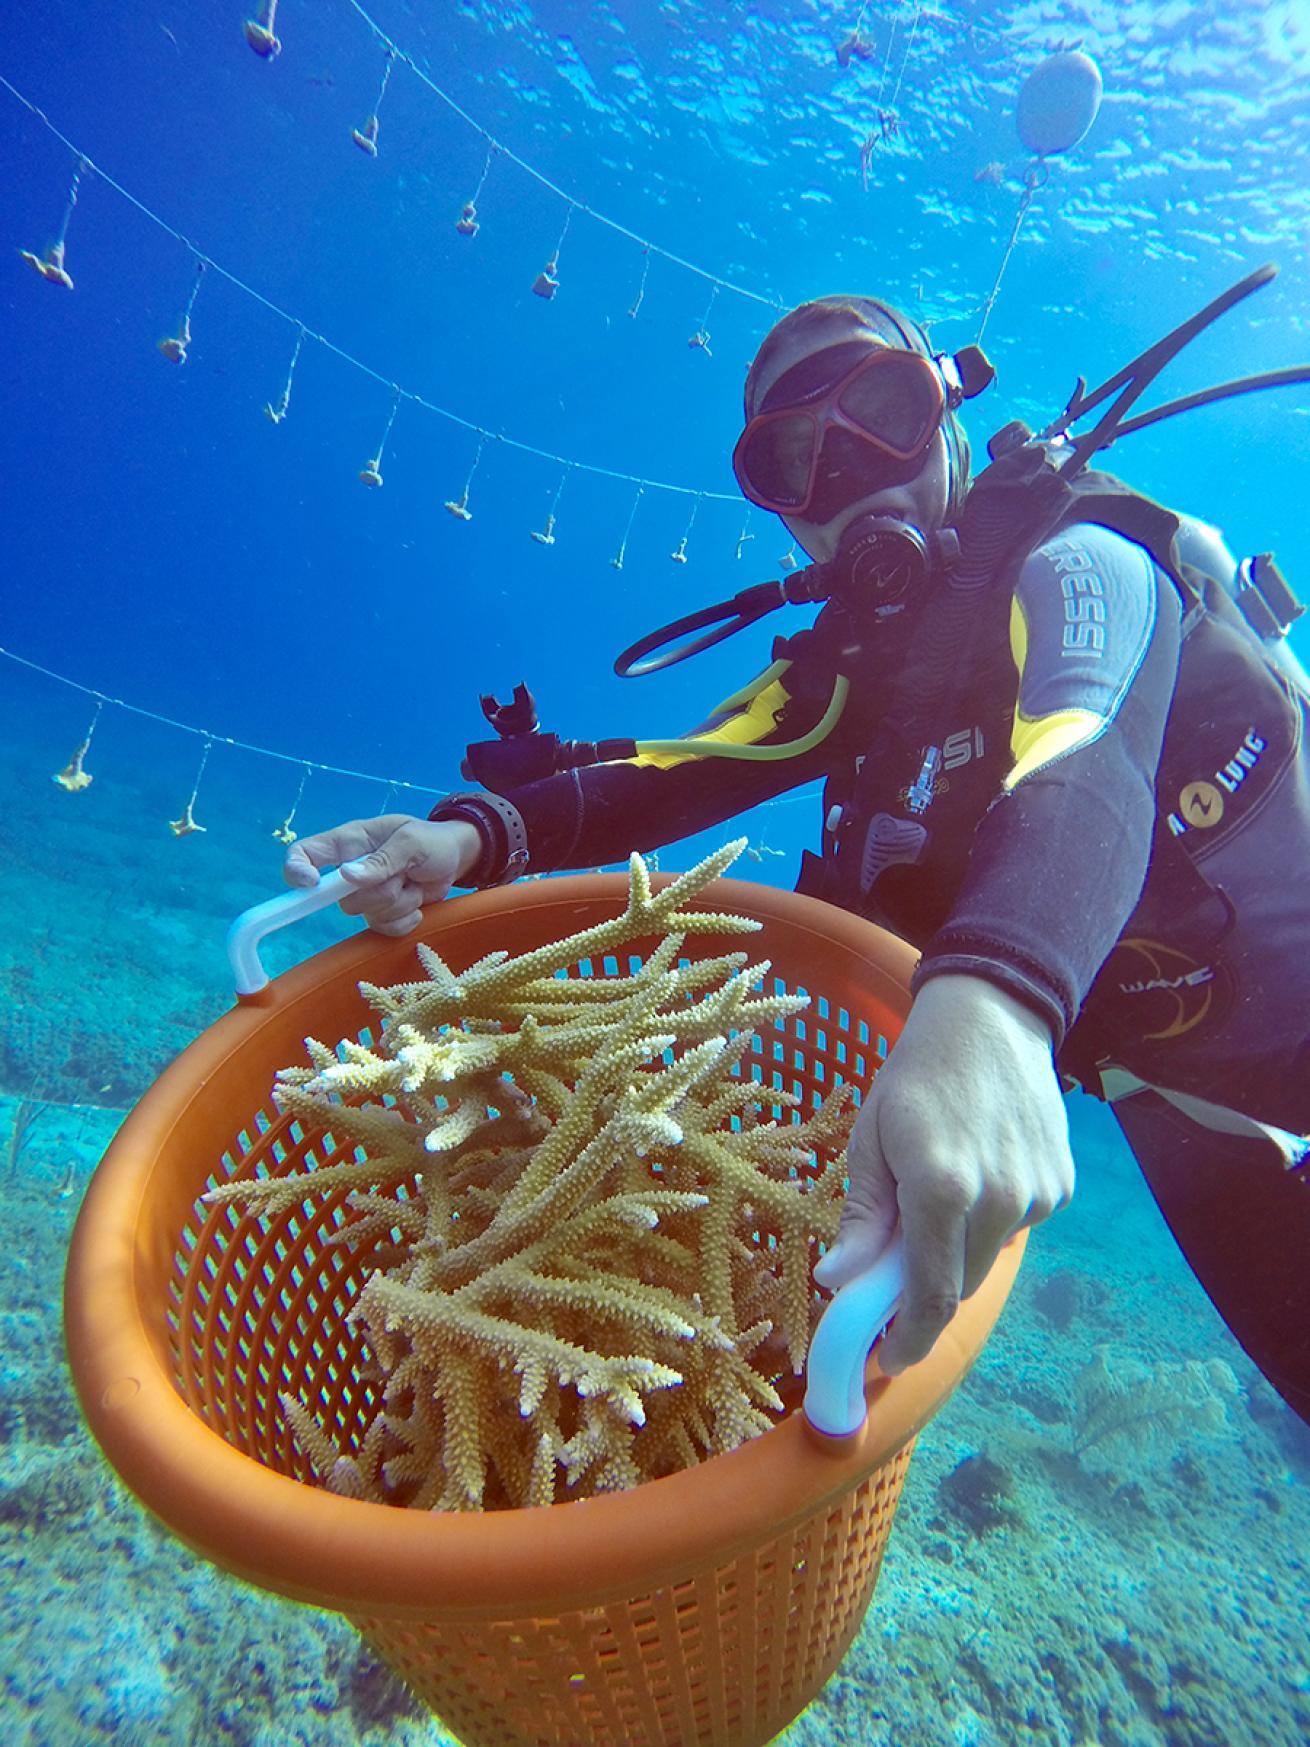 Diver carries a basket of coral outplants